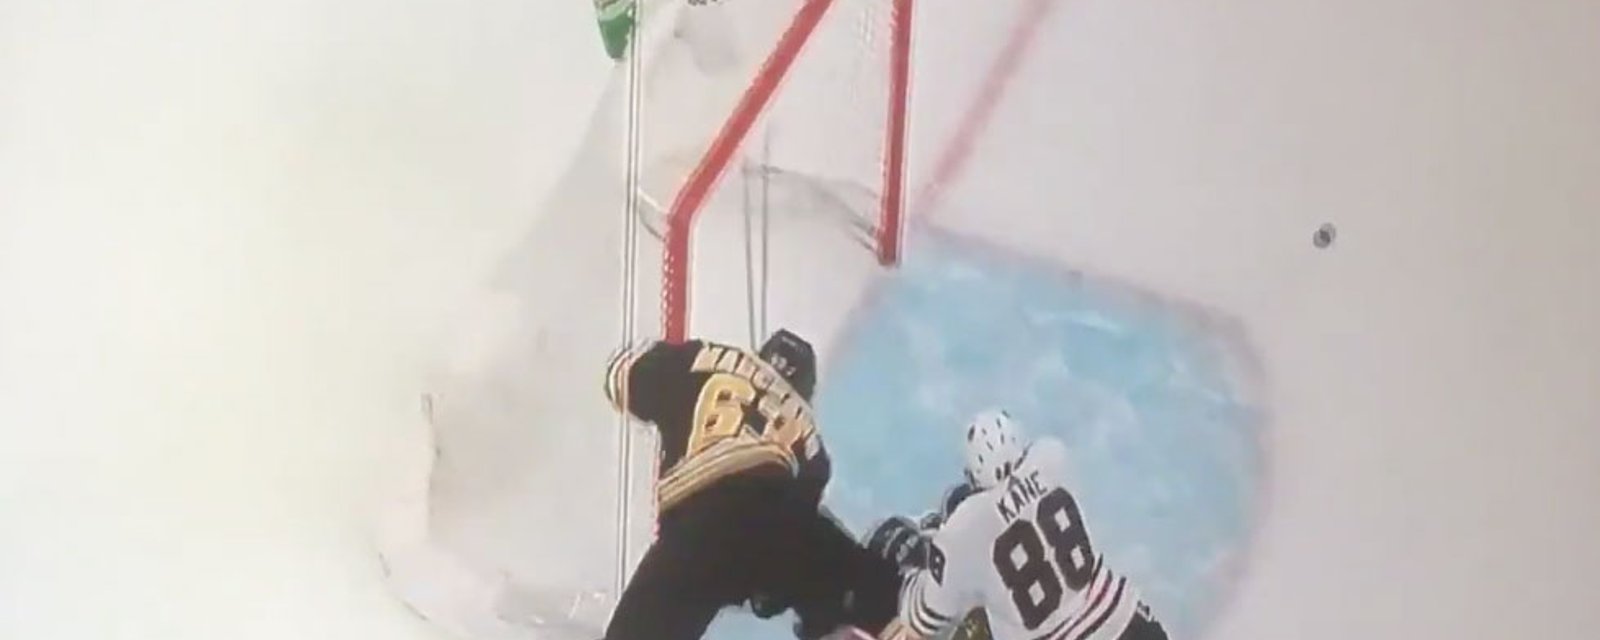 Marchand gets penalized for being Marchand in play that could have seriously injured him! 